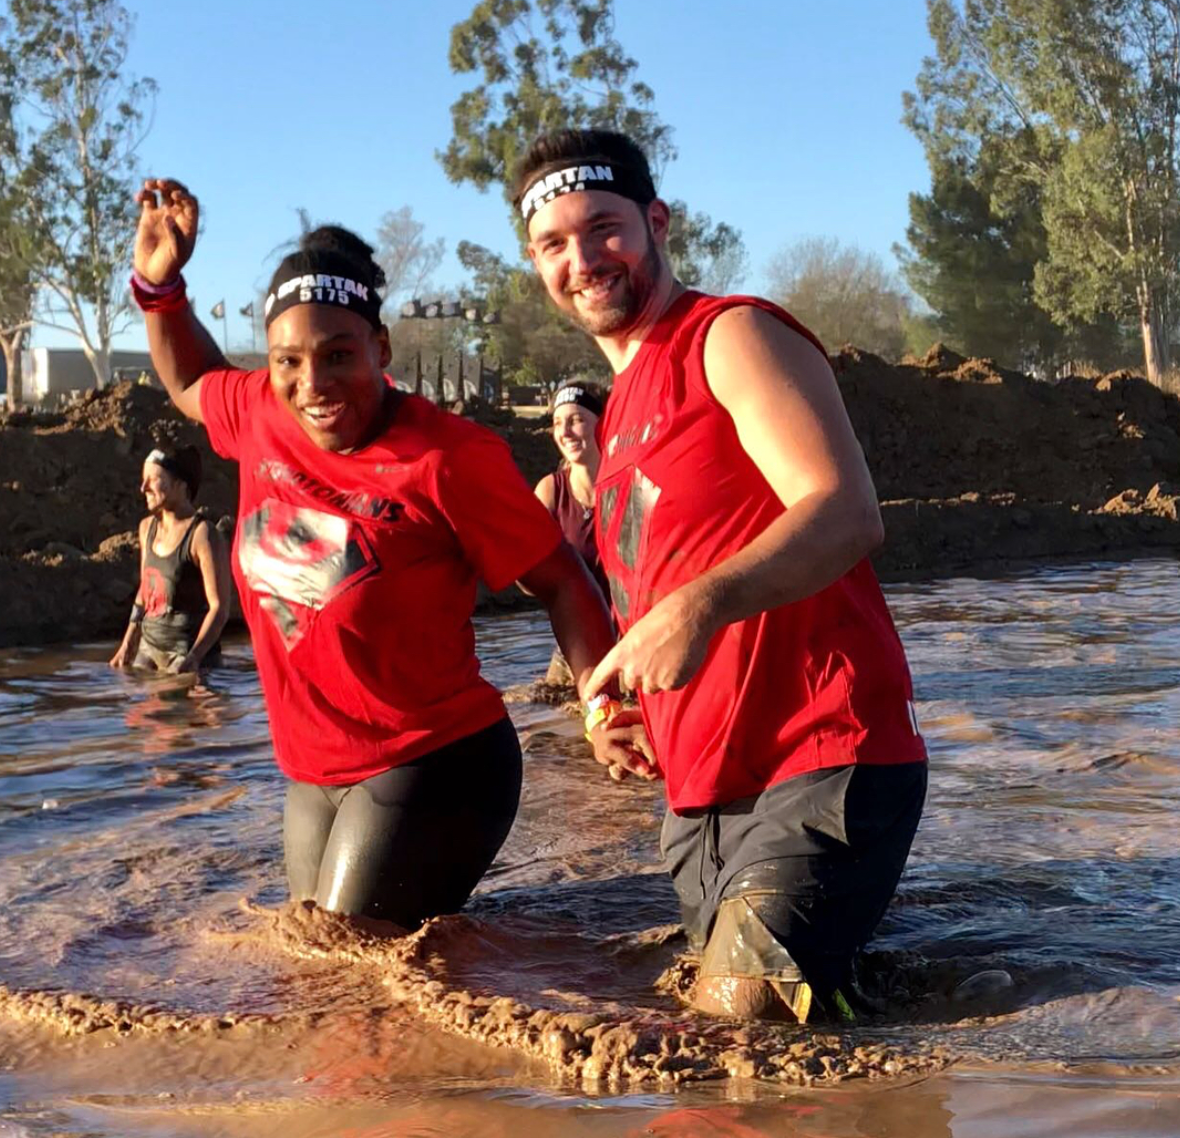 Serena Williams And Her Husband Alexis Ohanian Completed A Spartan Race Together
